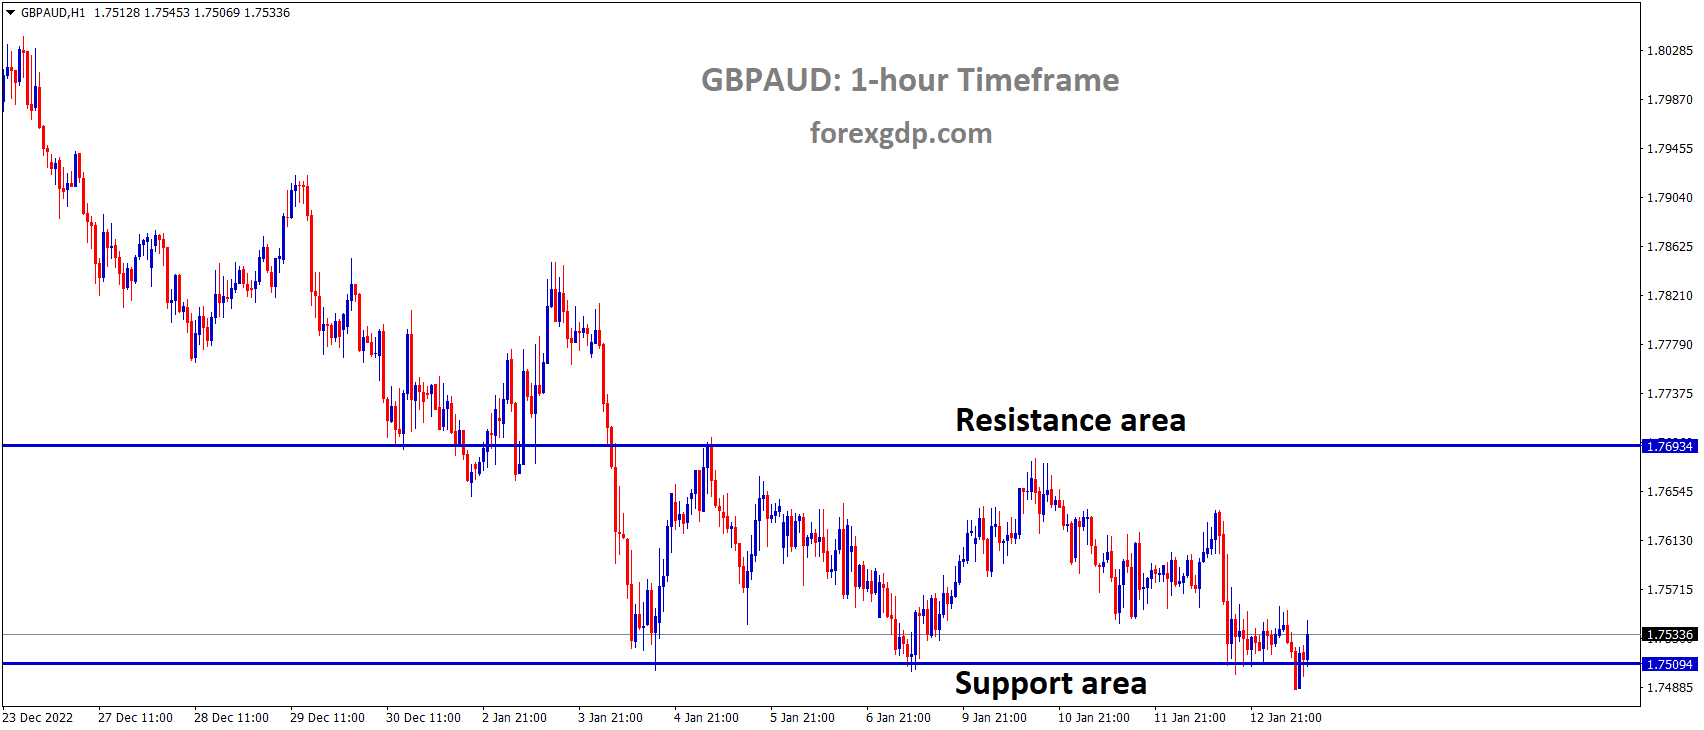 GBPAUD is moving in the Box pattern and the market has rebounded from the horizontal support area of the pattern